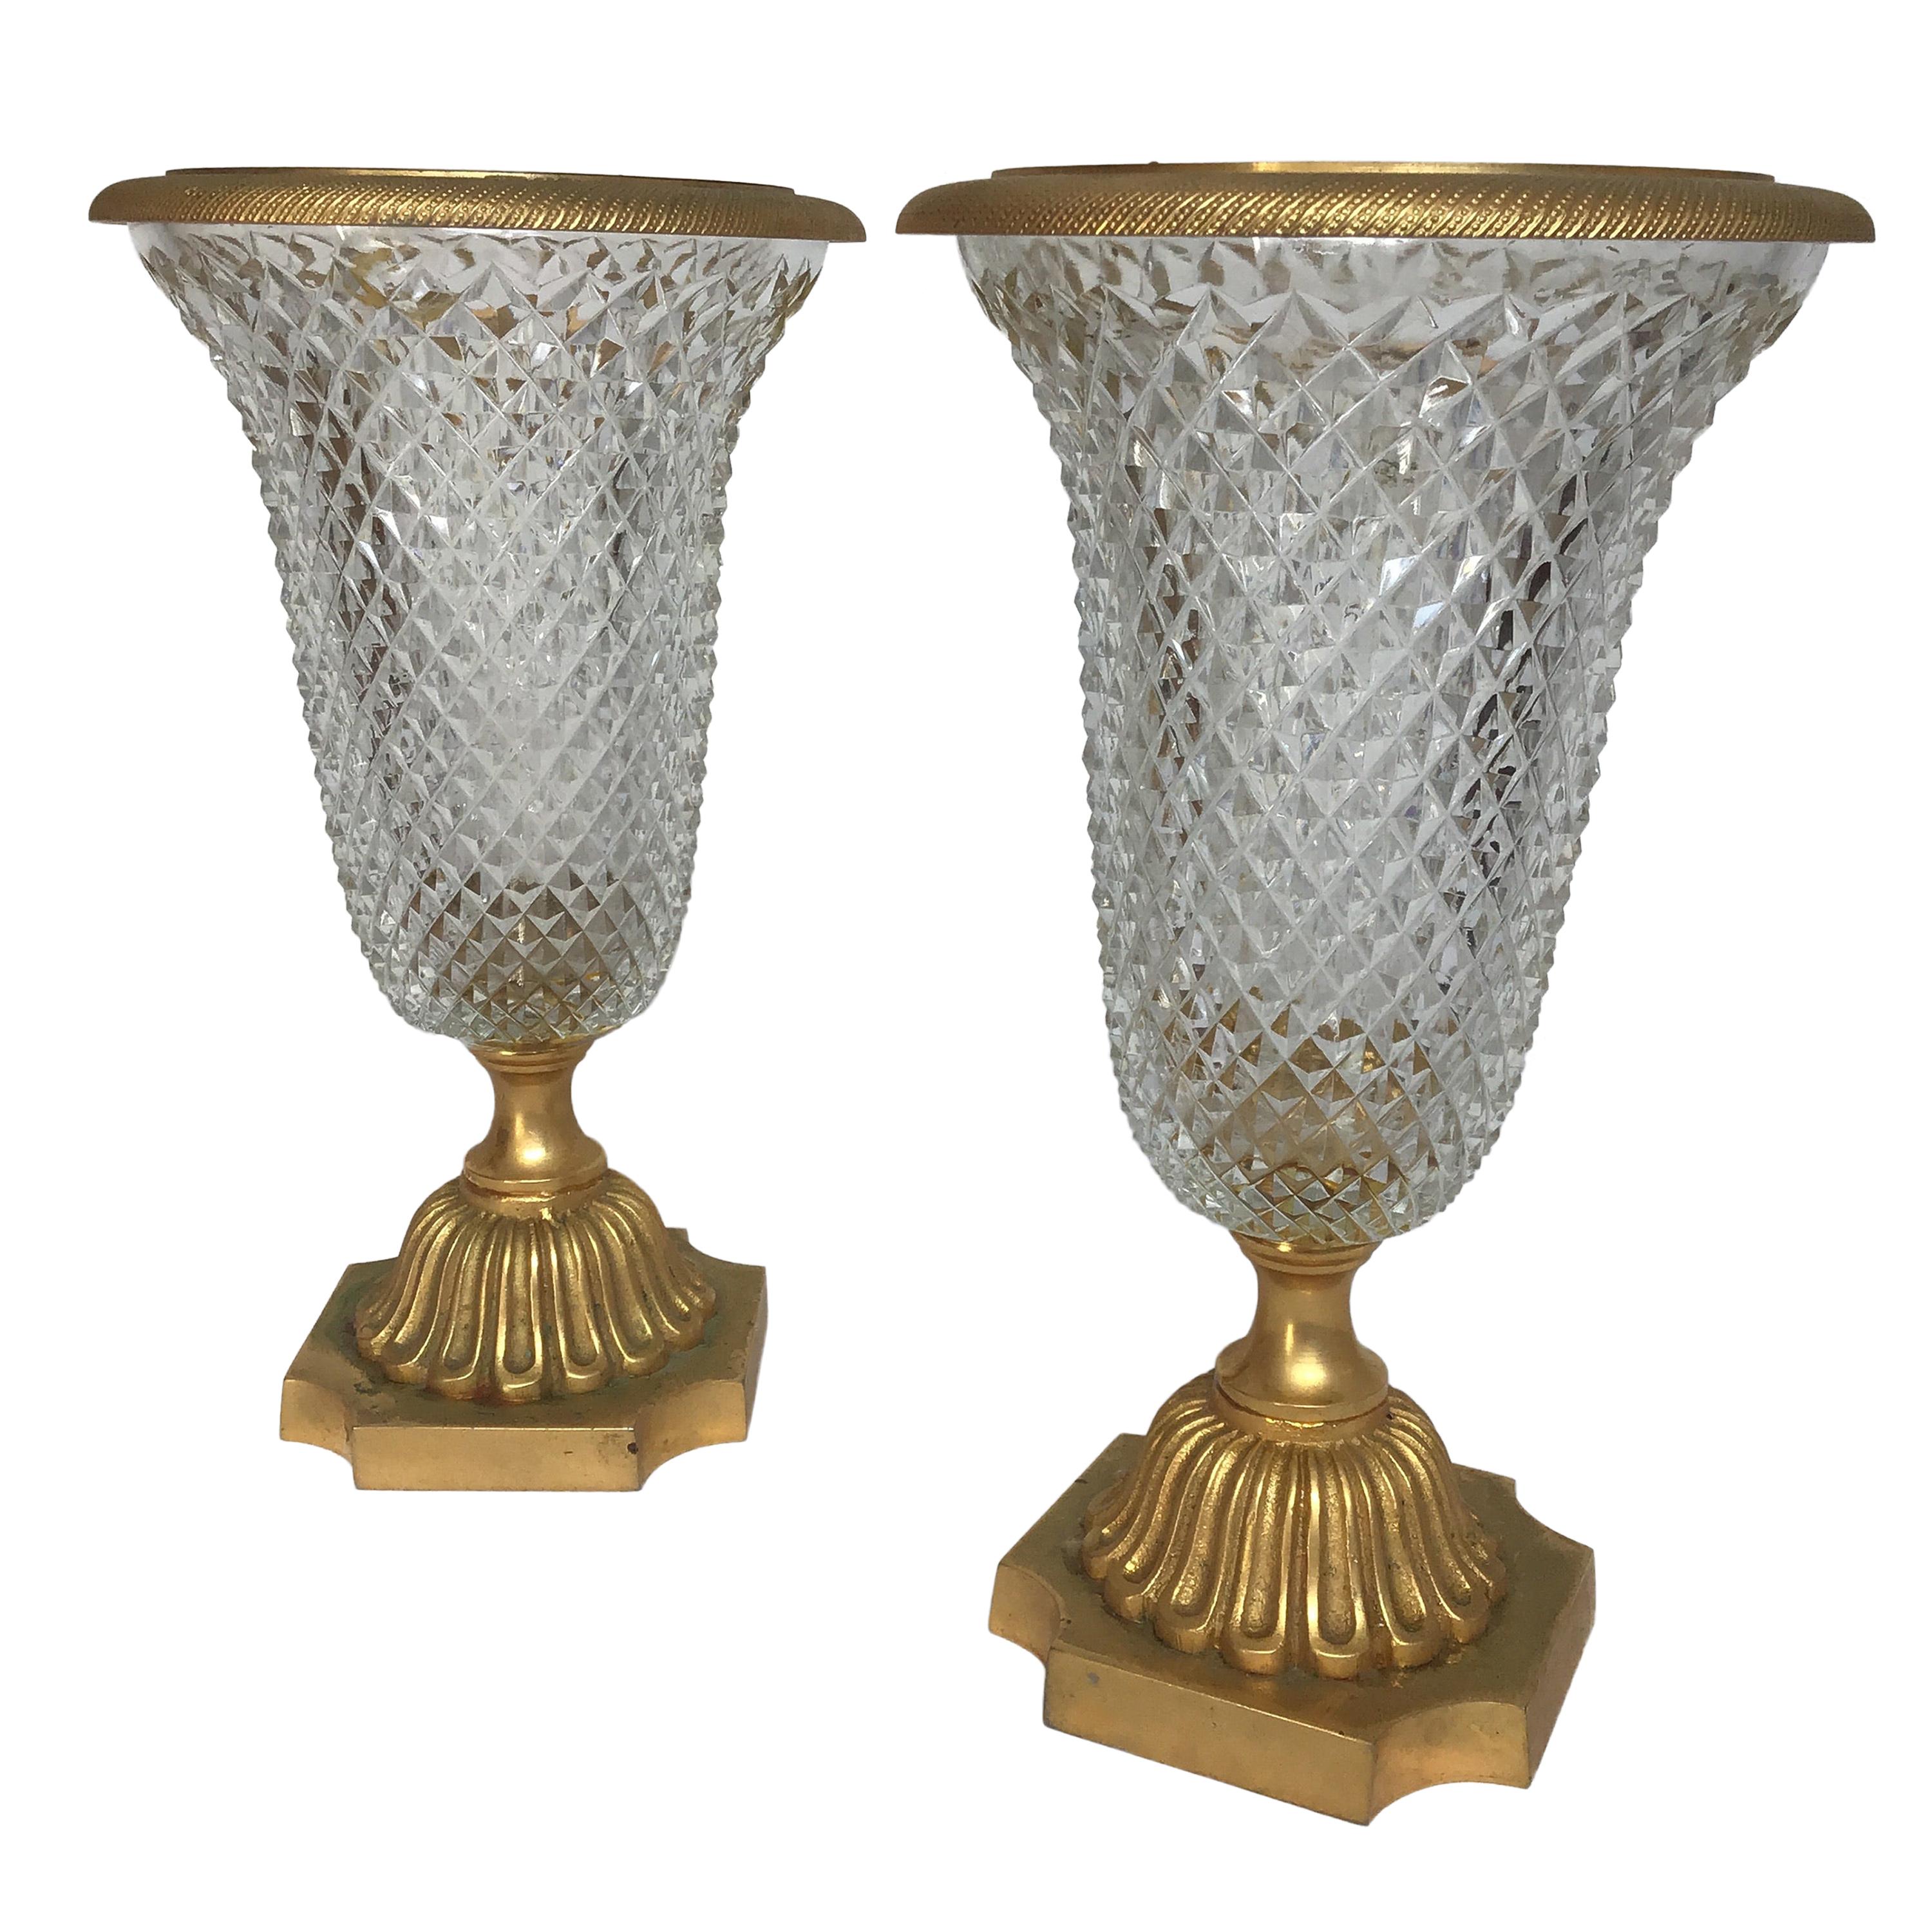 Pair of 1950s French Gilt Bronze and Glass Urns